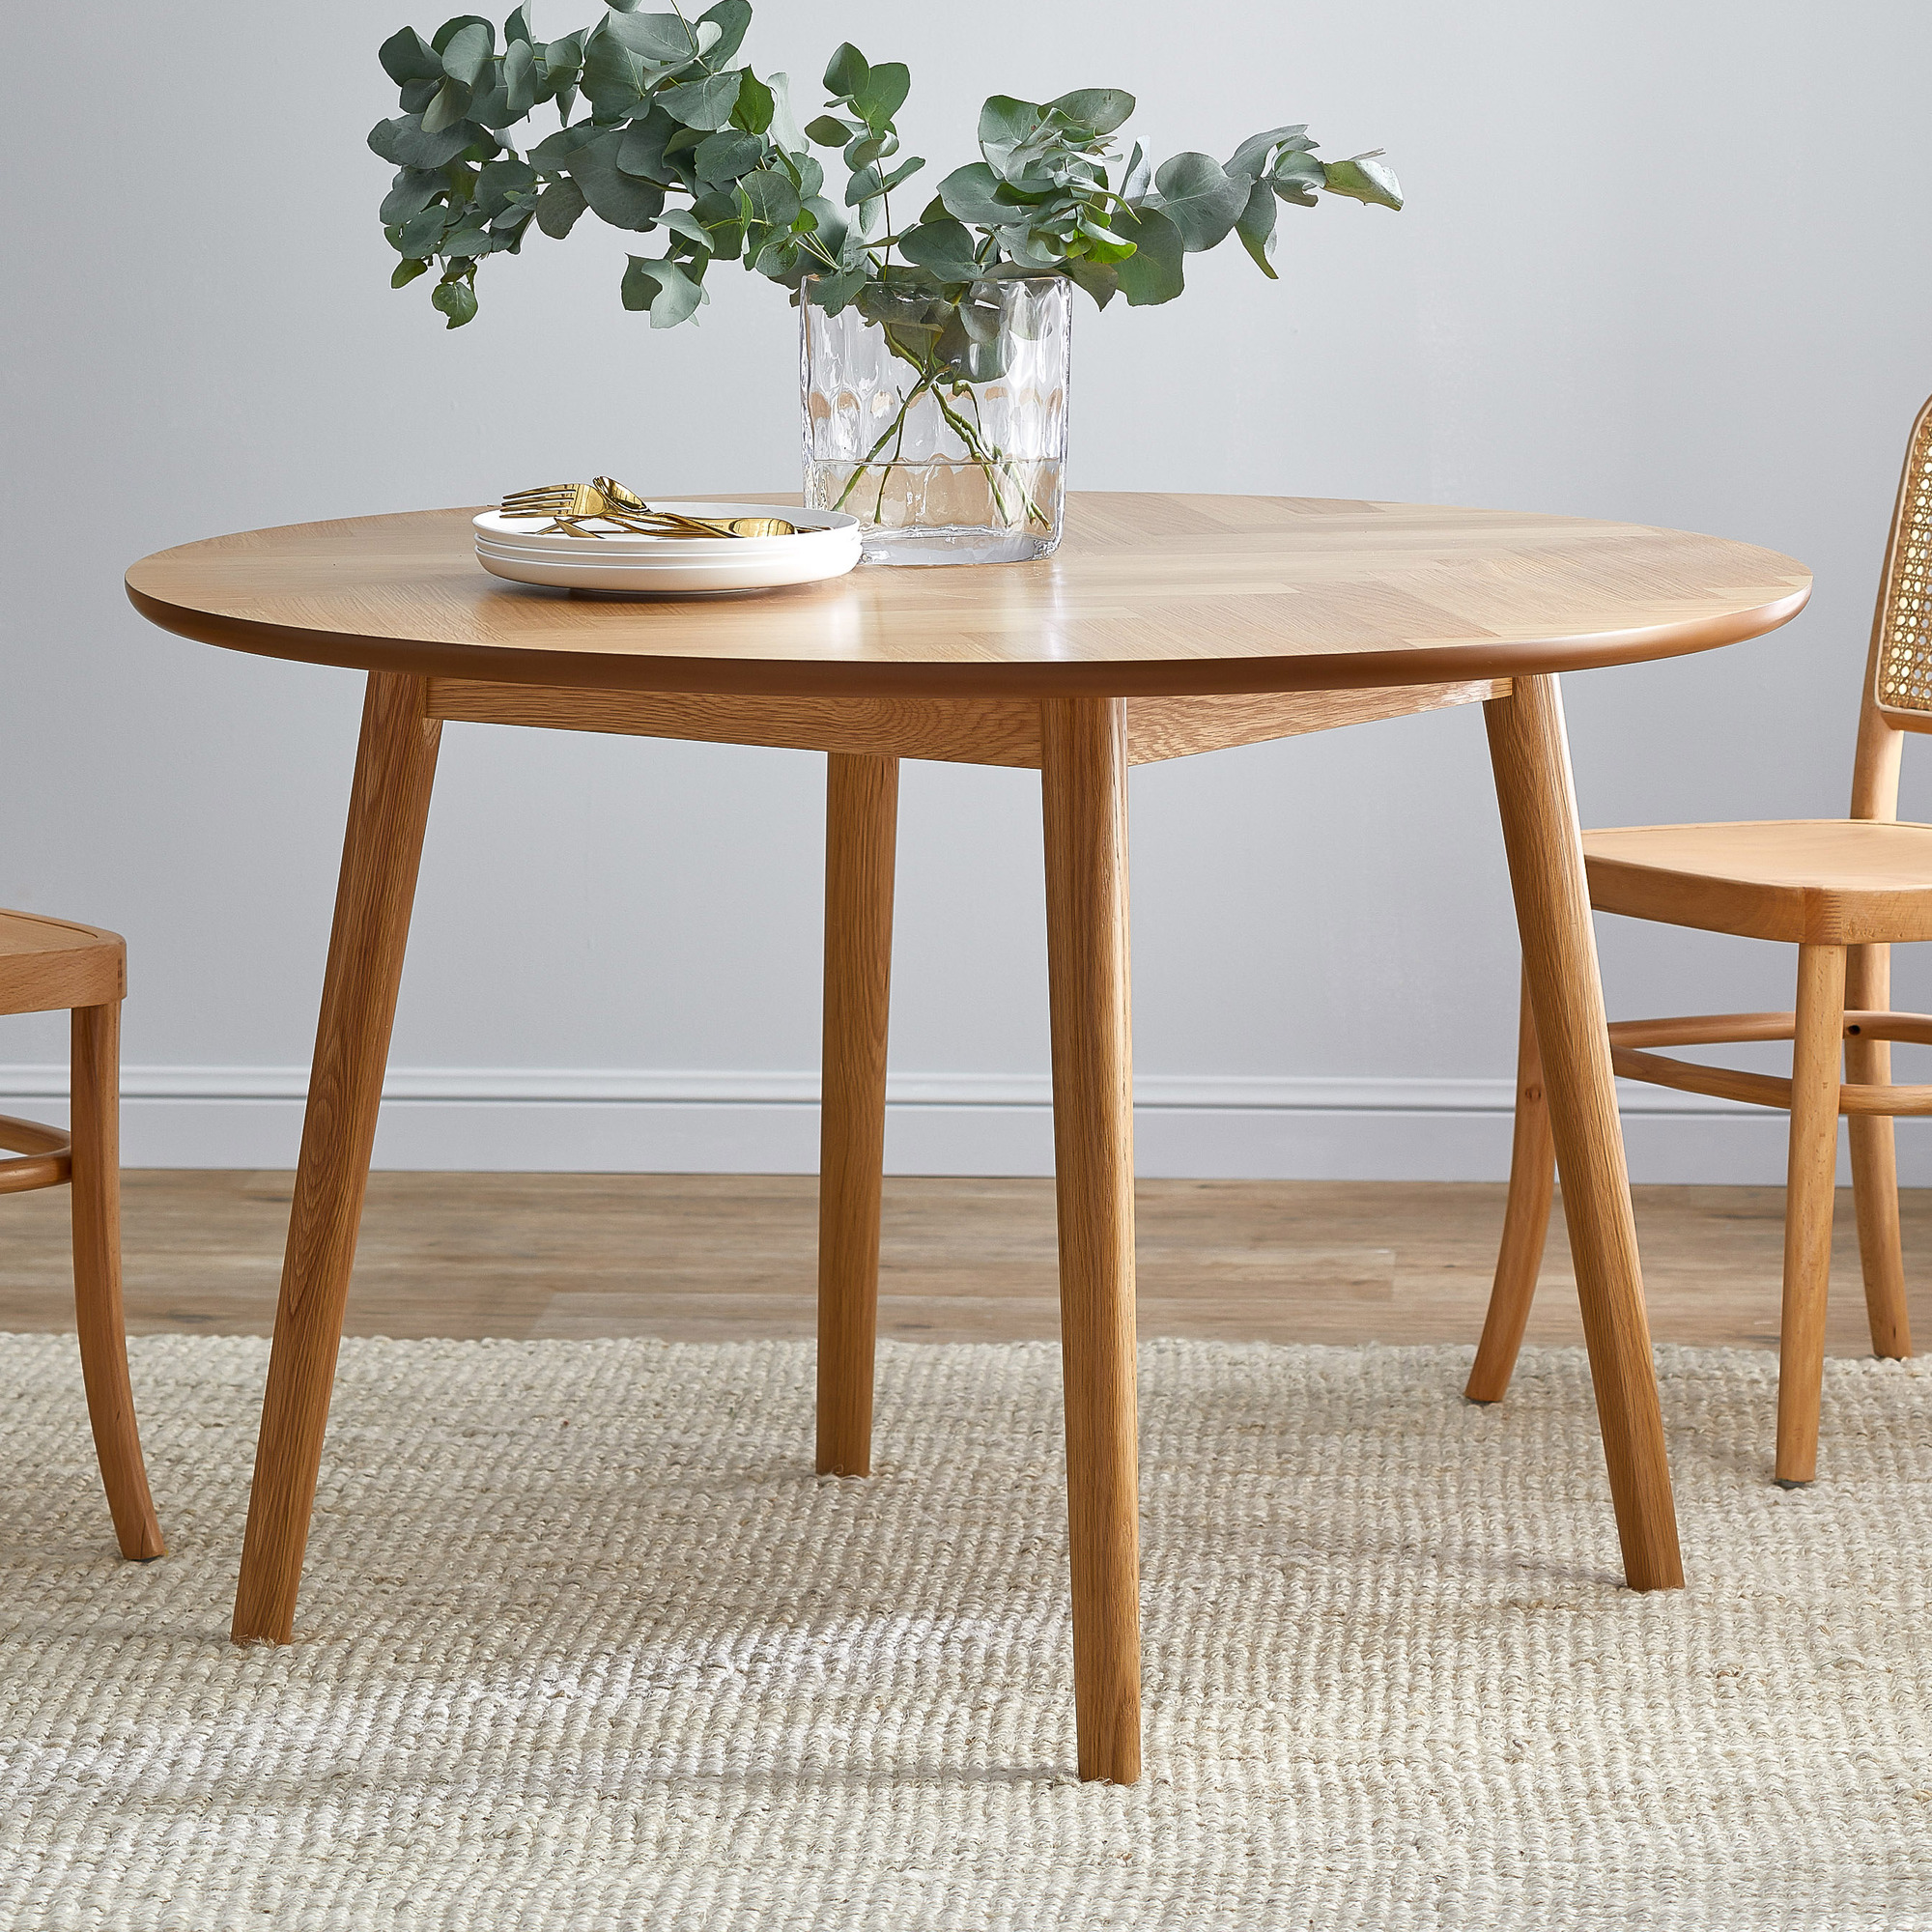 Webster Dion Parquet Round Dining Table, Round Dining Table 100cm Diameter